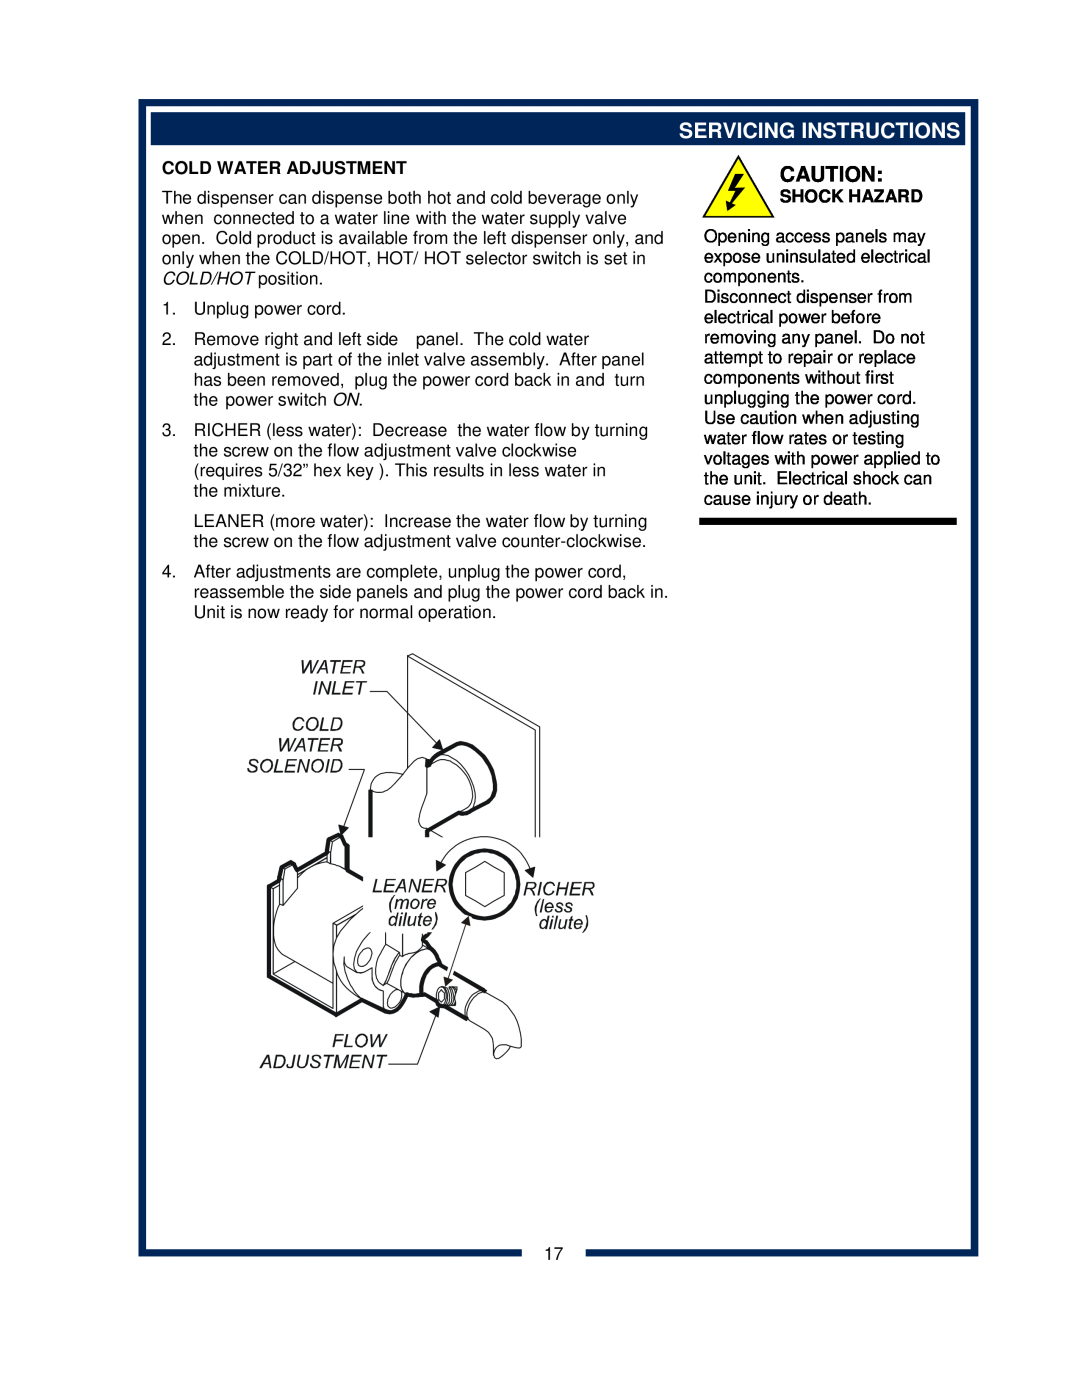 Bloomfield 9456, 9454 owner manual Servicing Instructions, Cold Water Adjustment, Shock Hazard 